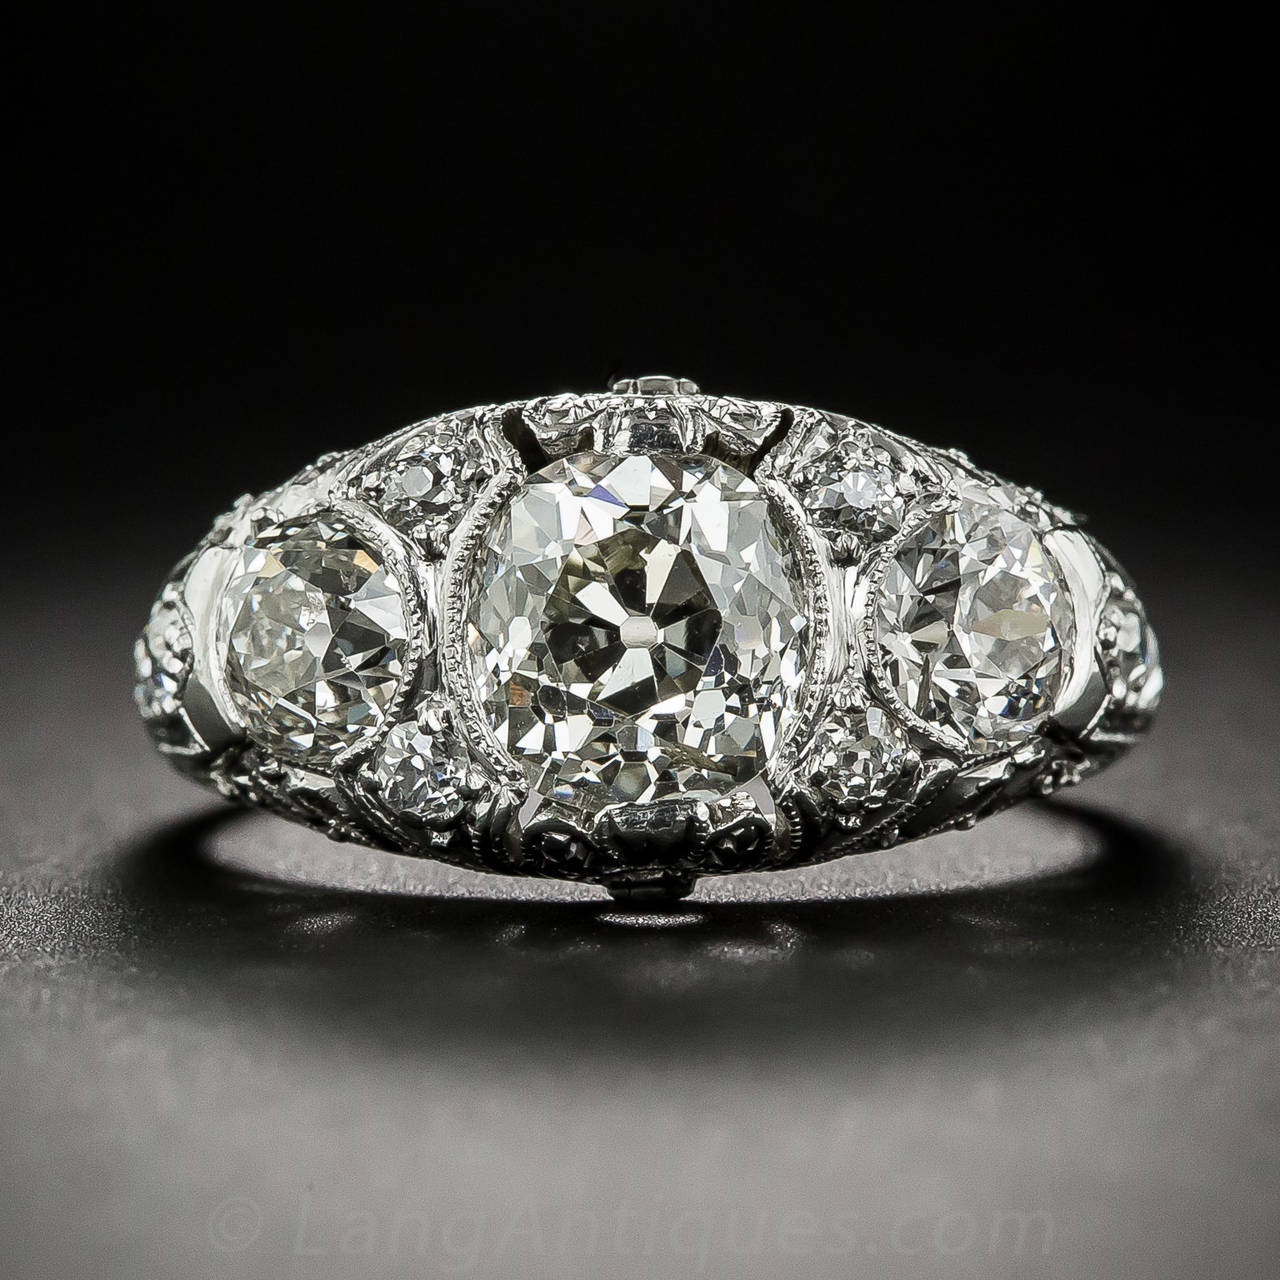 An exemplary original early-Art Deco (circa 1920) three-stone ring, elegantly handcrafted in platinum and featuring, in the center, a sparkling old mine-cut diamond weighing one-and-a-half carats. The sun-bright diamond is aided and abetted, left